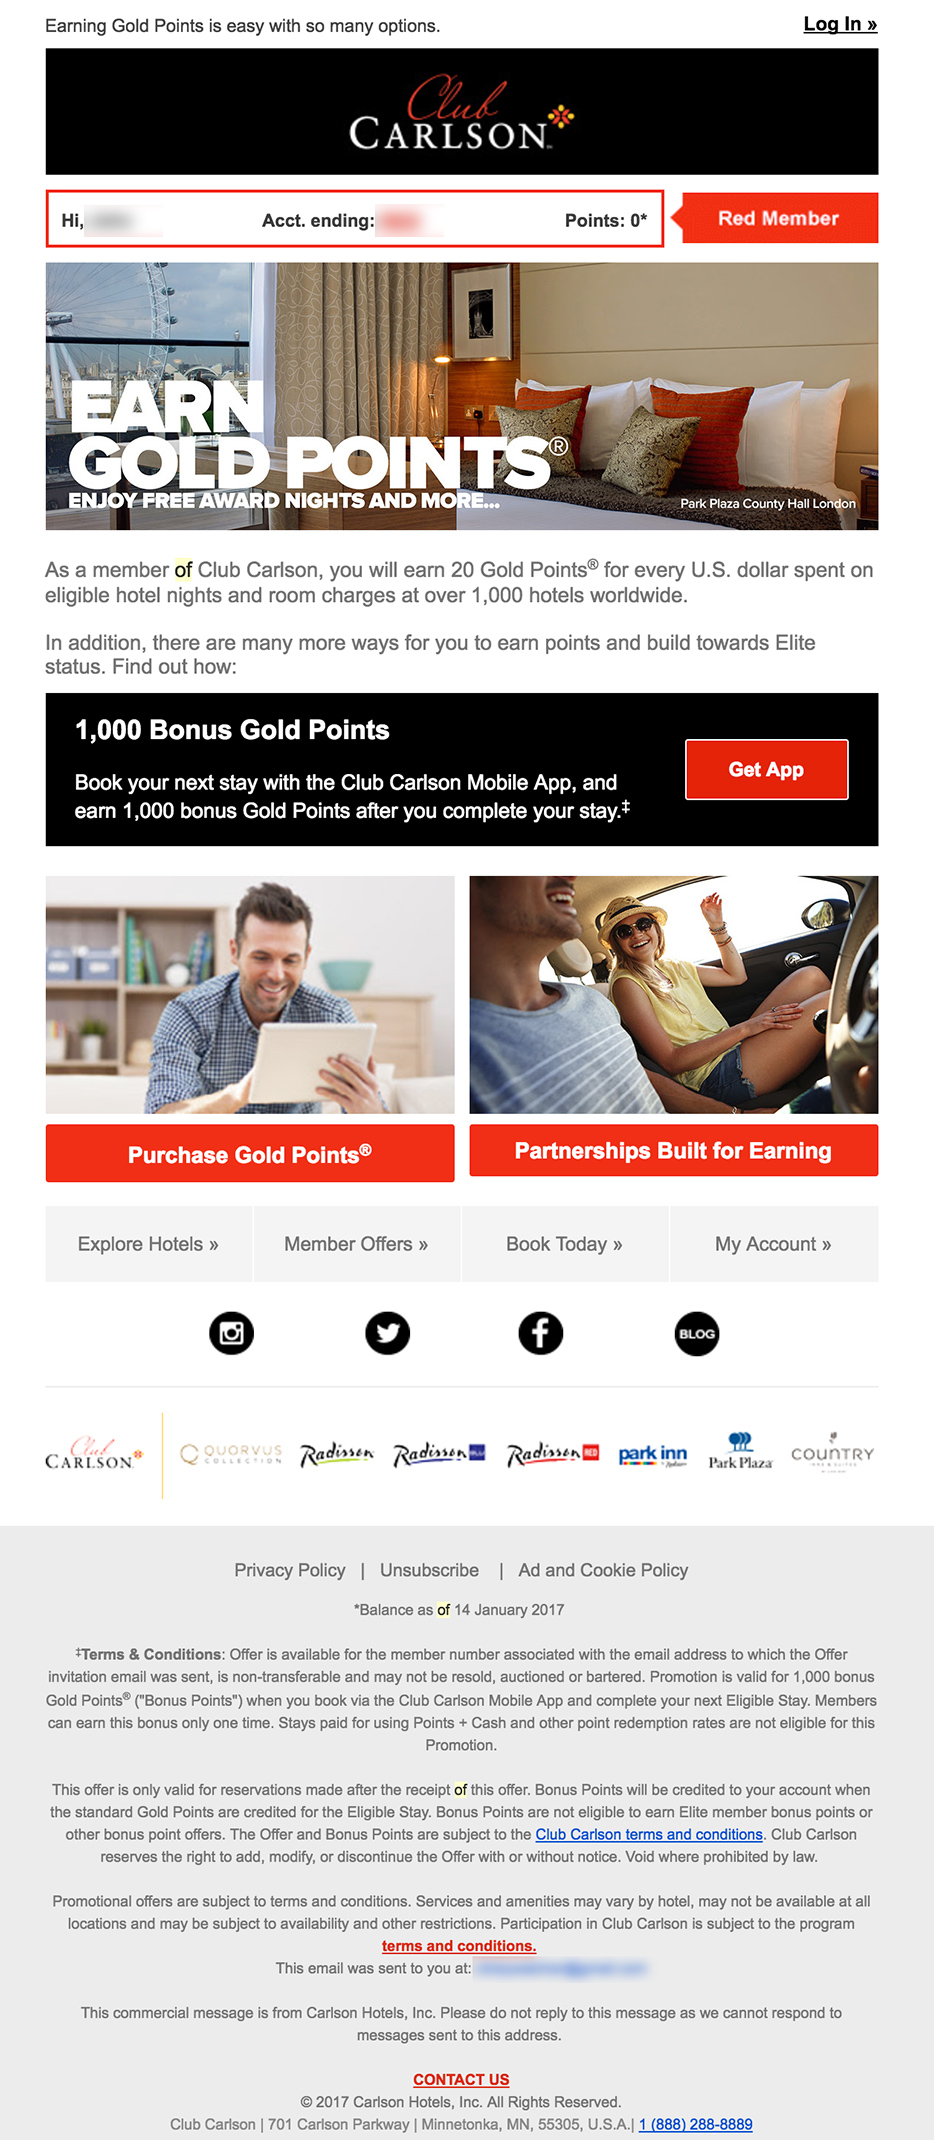 Club Carlson welcome email 2 of 3